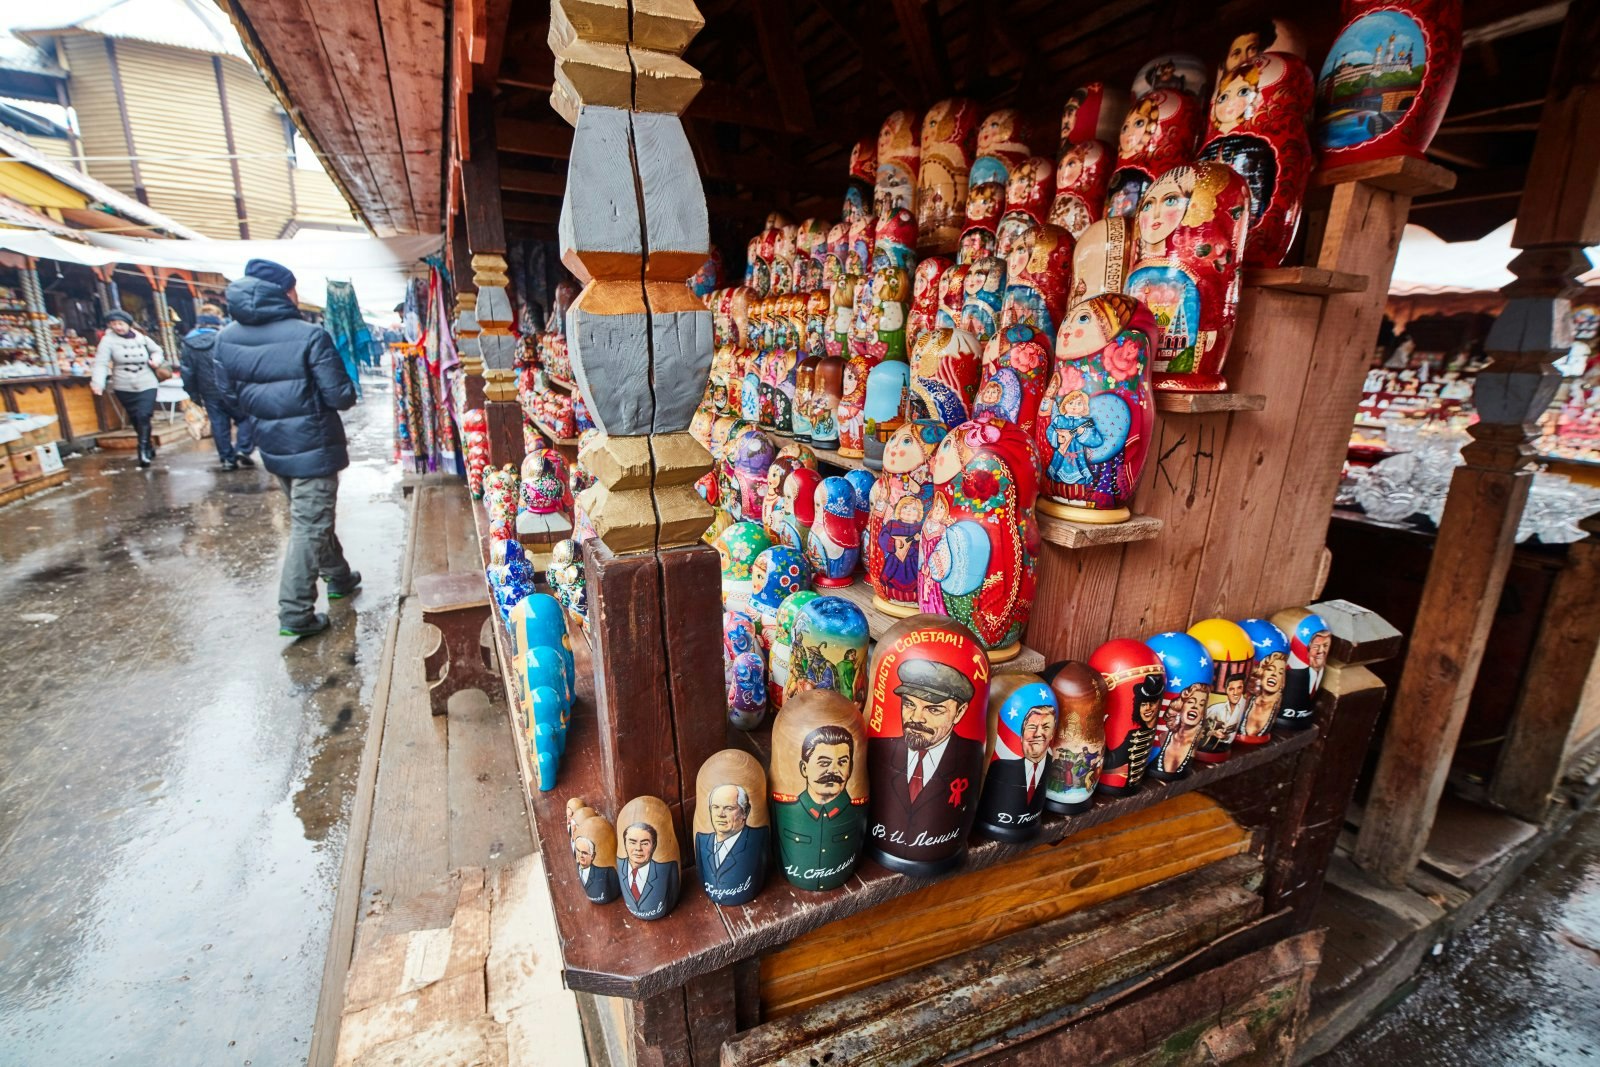 An outdoor stall selling Russian dolls painted in bright reds and blues, some with recognisable figures on them, such as Donald Trump and Marilyn Monroe